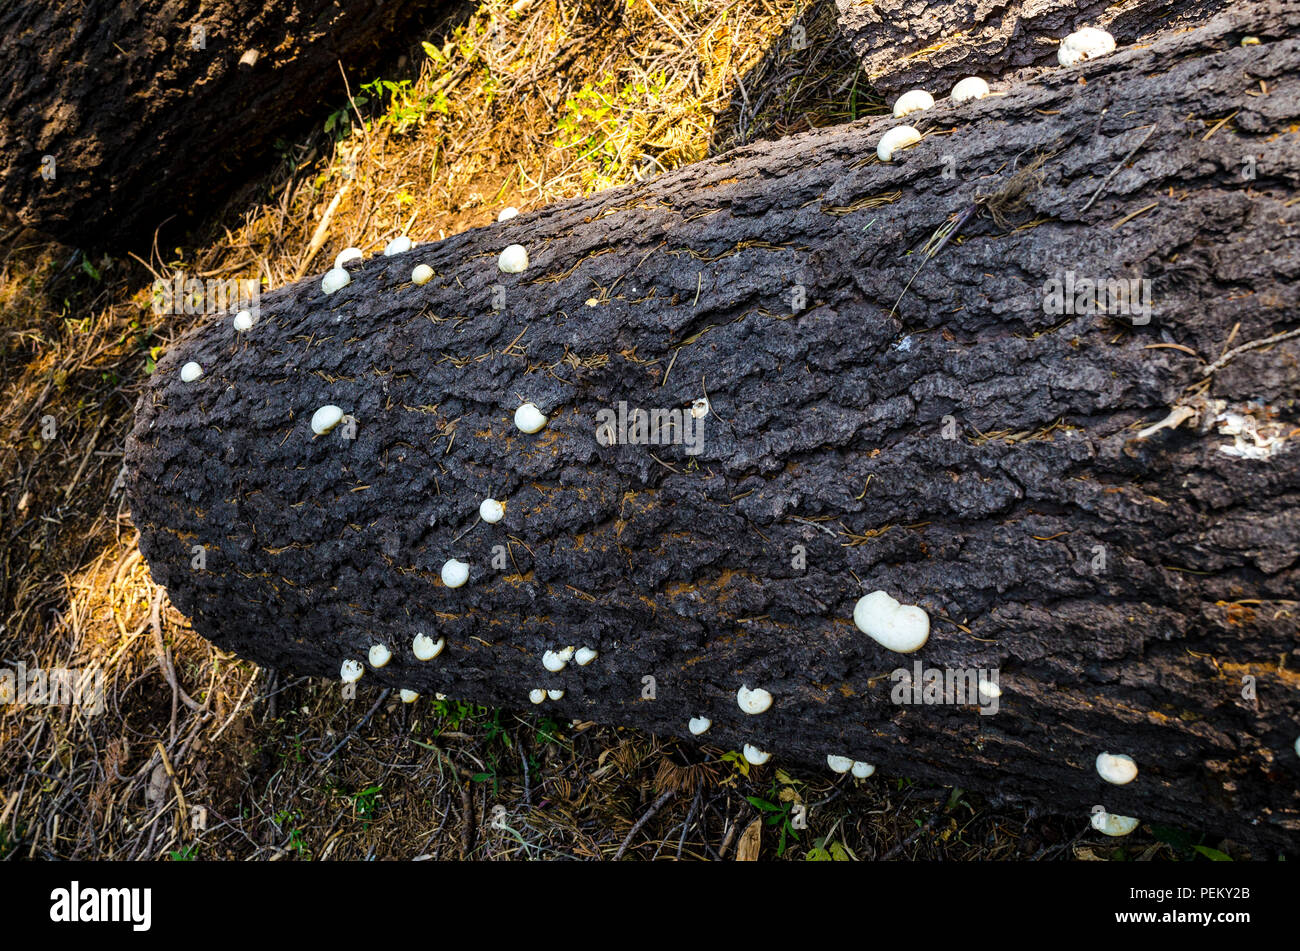 Fungus growing on cut logs in the Stanislaus National Forest California Sierra Nevada mountains Stock Photo